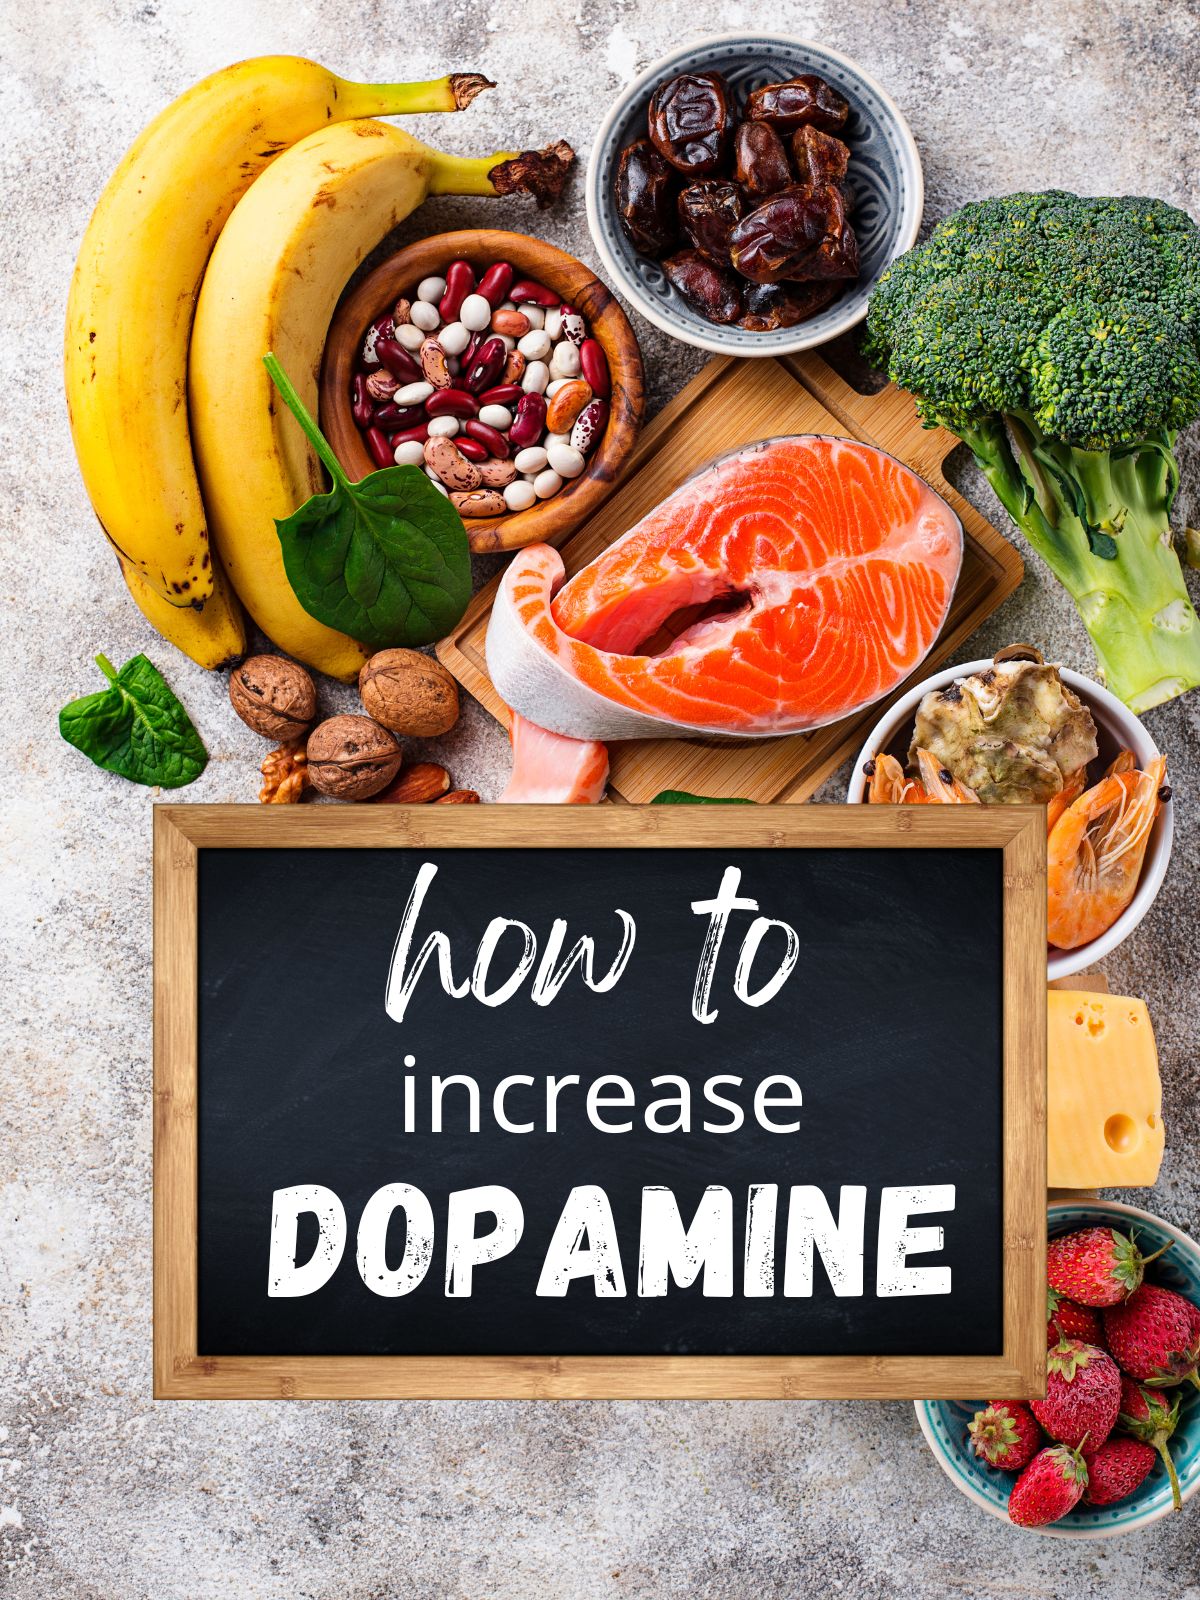 Several food items that increase dopamine natrually with the text "how to increase dopamine."